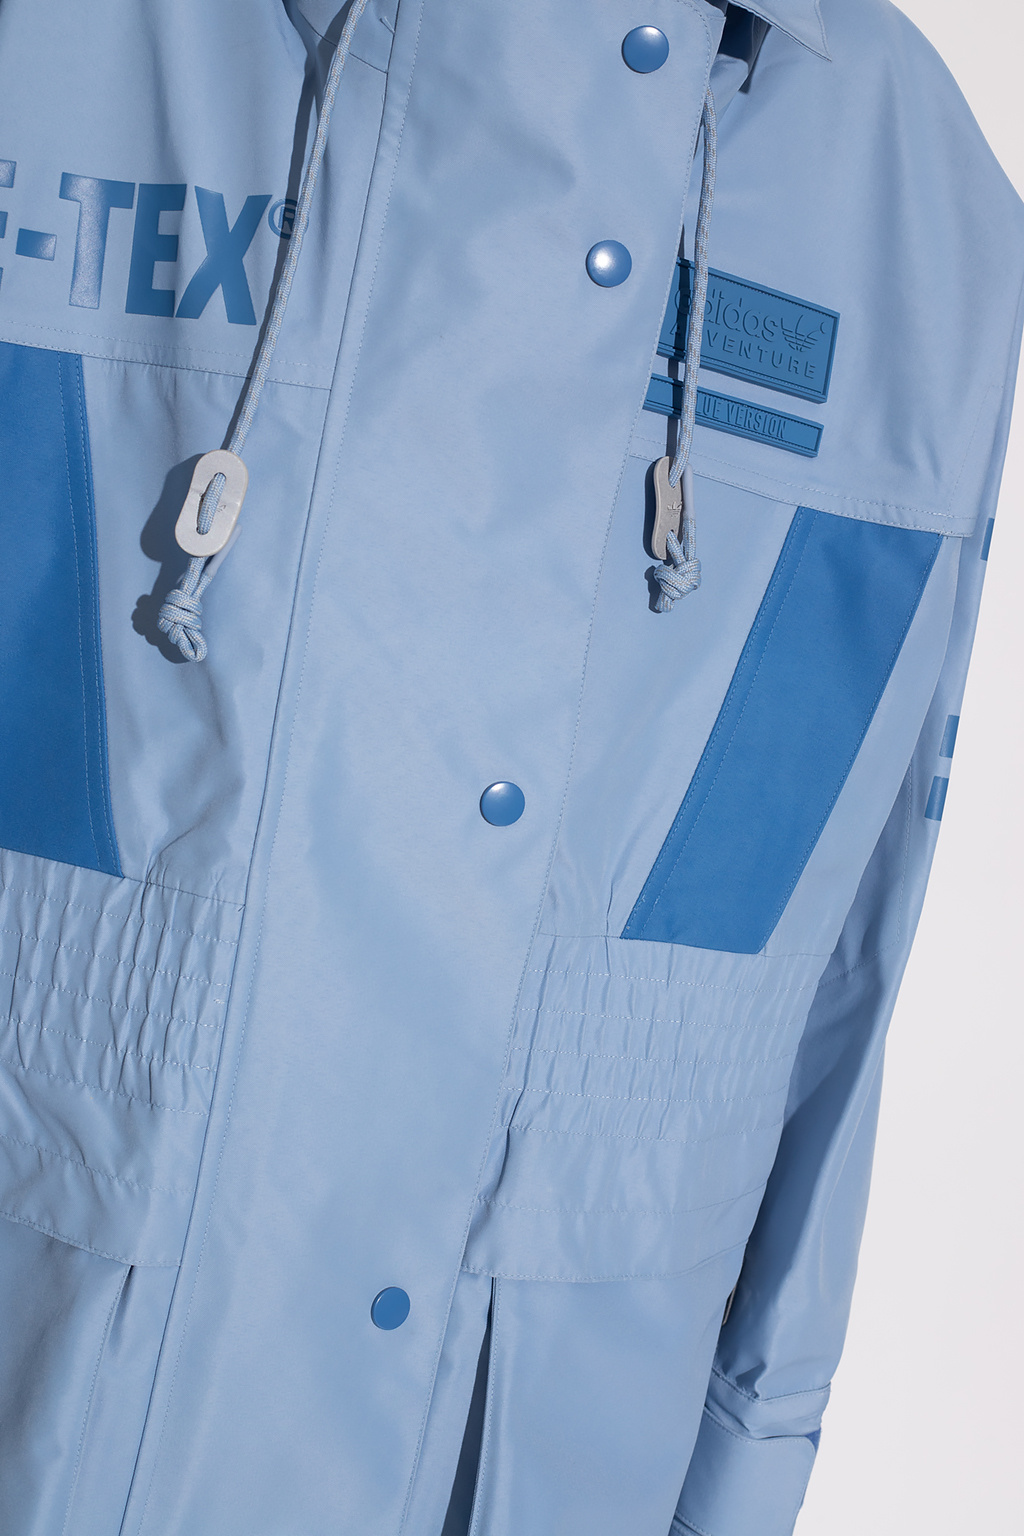 ADIDAS Originals The ‘Blue Version’ collection hooded rain coat